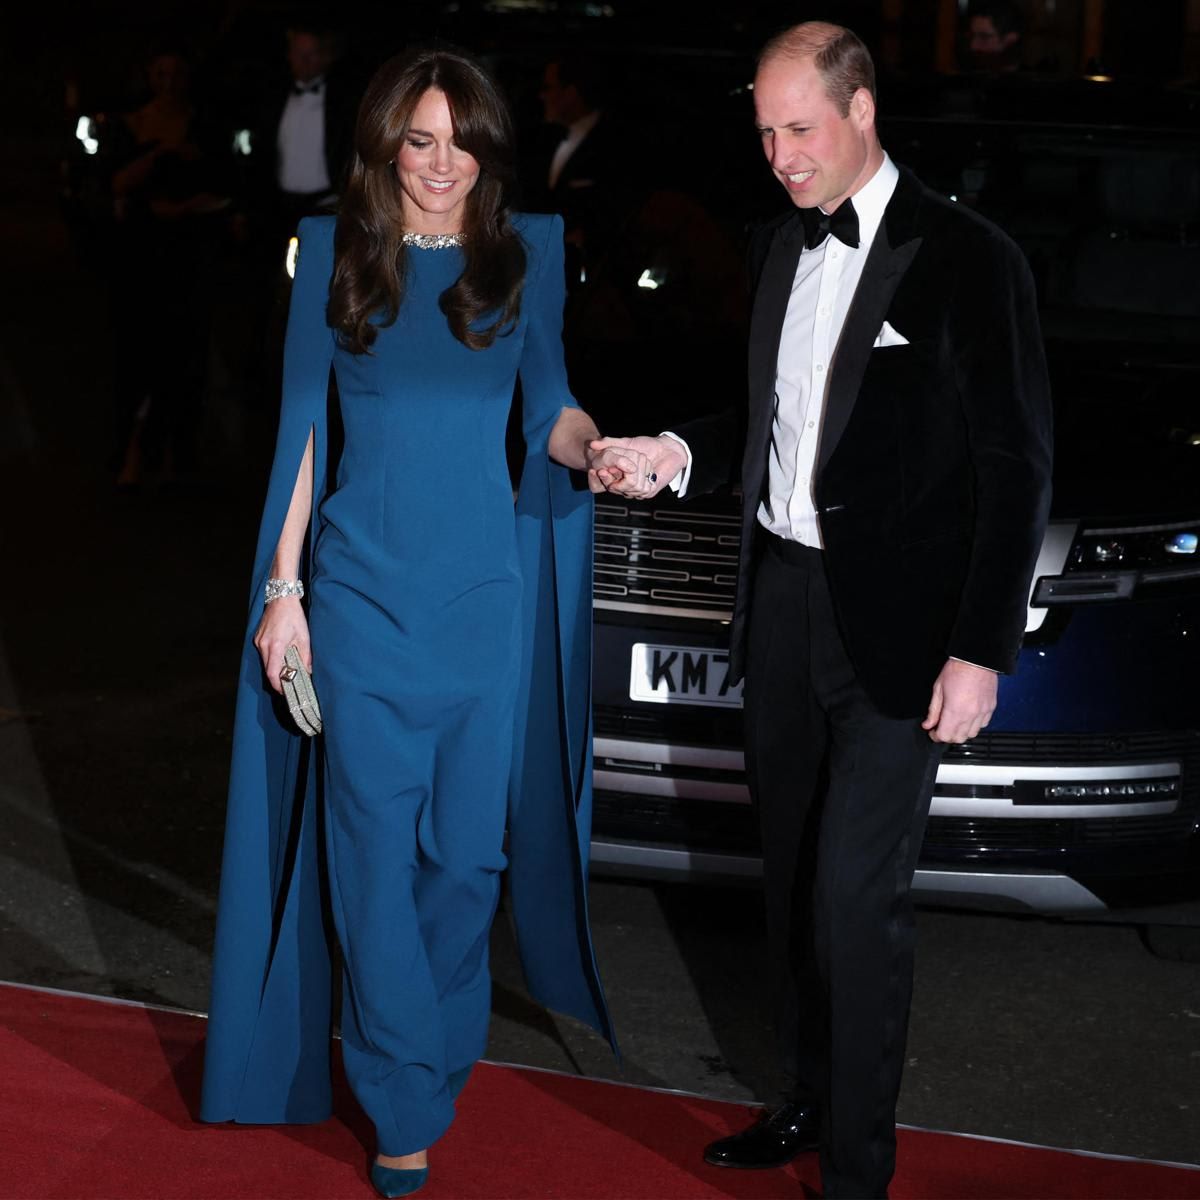 The royal couple attended the Royal Variety Performance for the first time since 2021